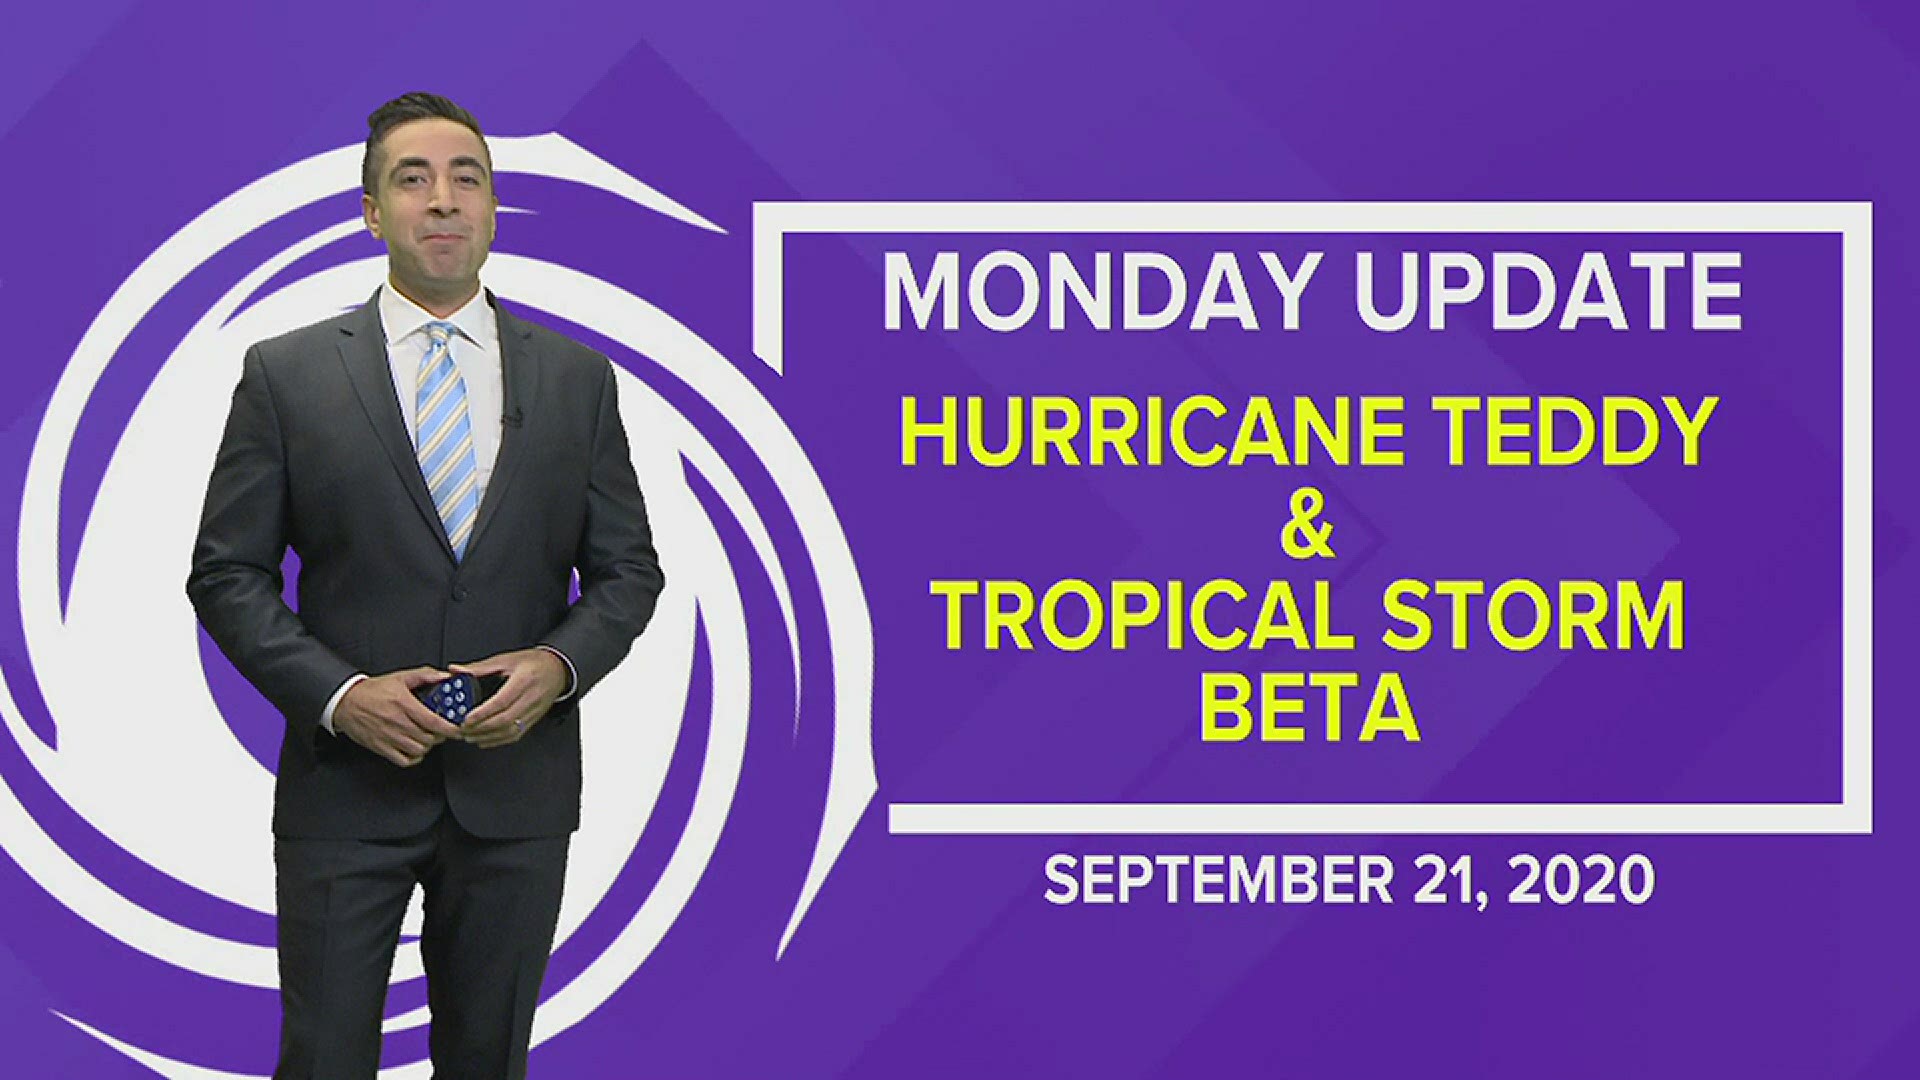 13News Now Meteorologist Tim Pandajis has the latest on Hurricane Teddy,Tropical Storm Beta and Post-Tropical Cyclone Paulette.